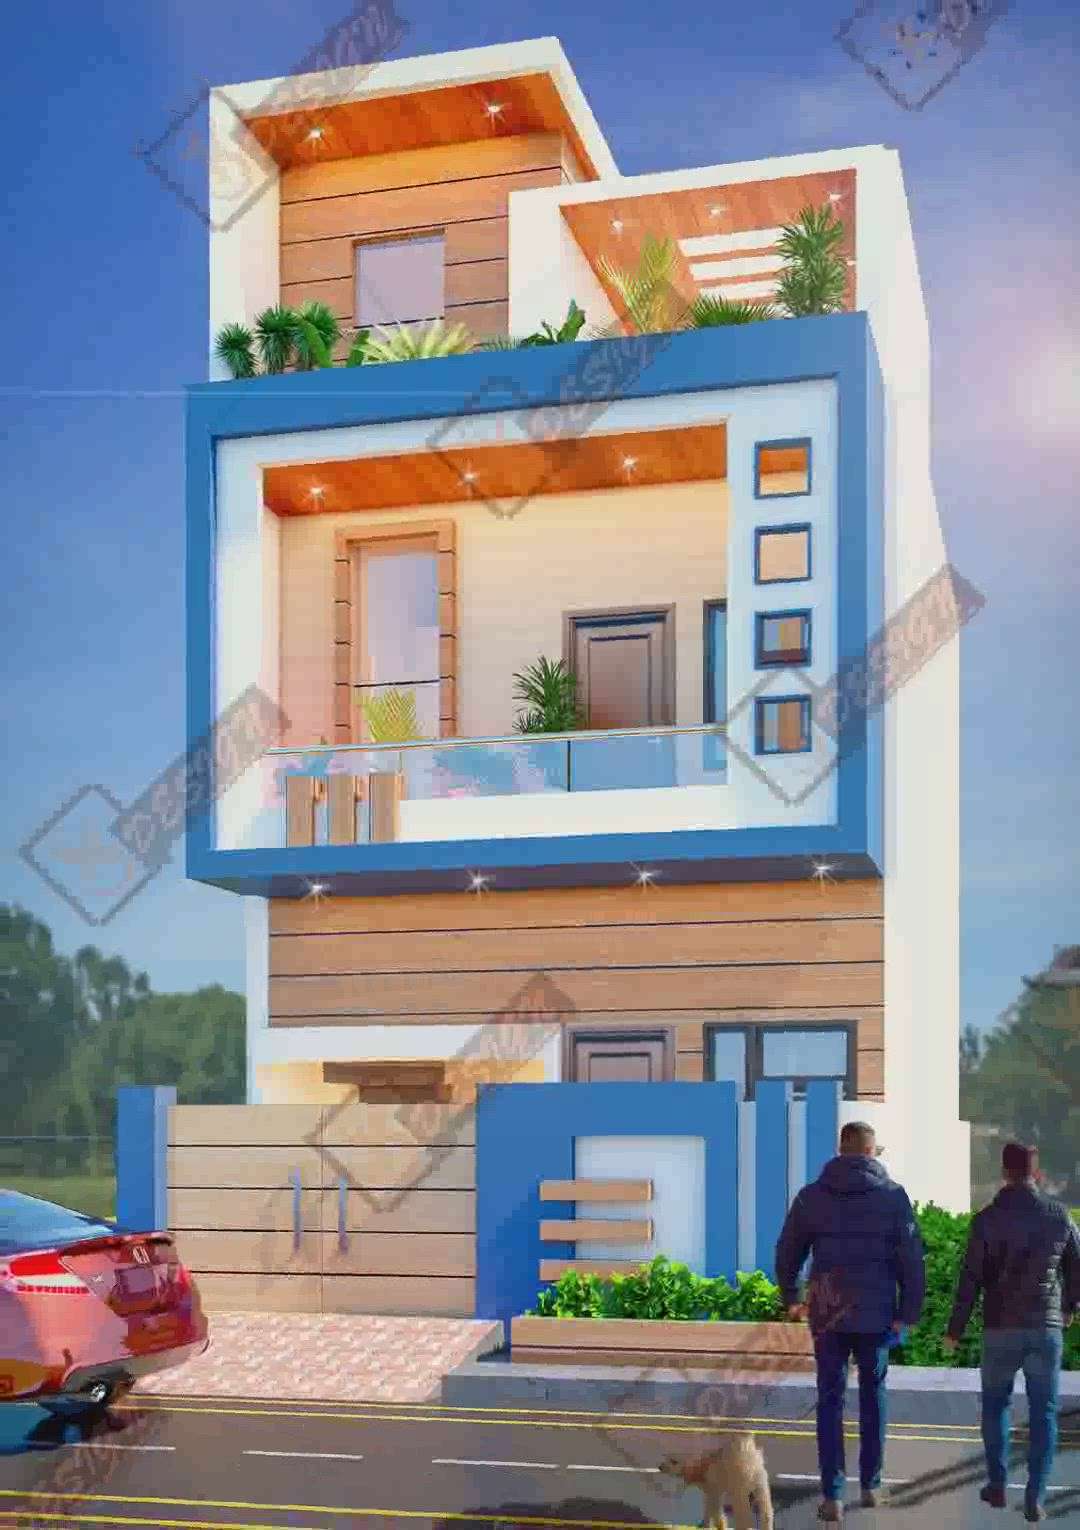 3d house design
#architecture #design #interiordesign #art #architecturephotography #photography #travel #interior #architecturelovers #architect #home #homedecor #archilovers #building #photooftheday #arquitectura #instagood #construction #ig #travelphotography #city #homedesign #d #decor #nature #love #luxury #picoftheday #interiors #realestate